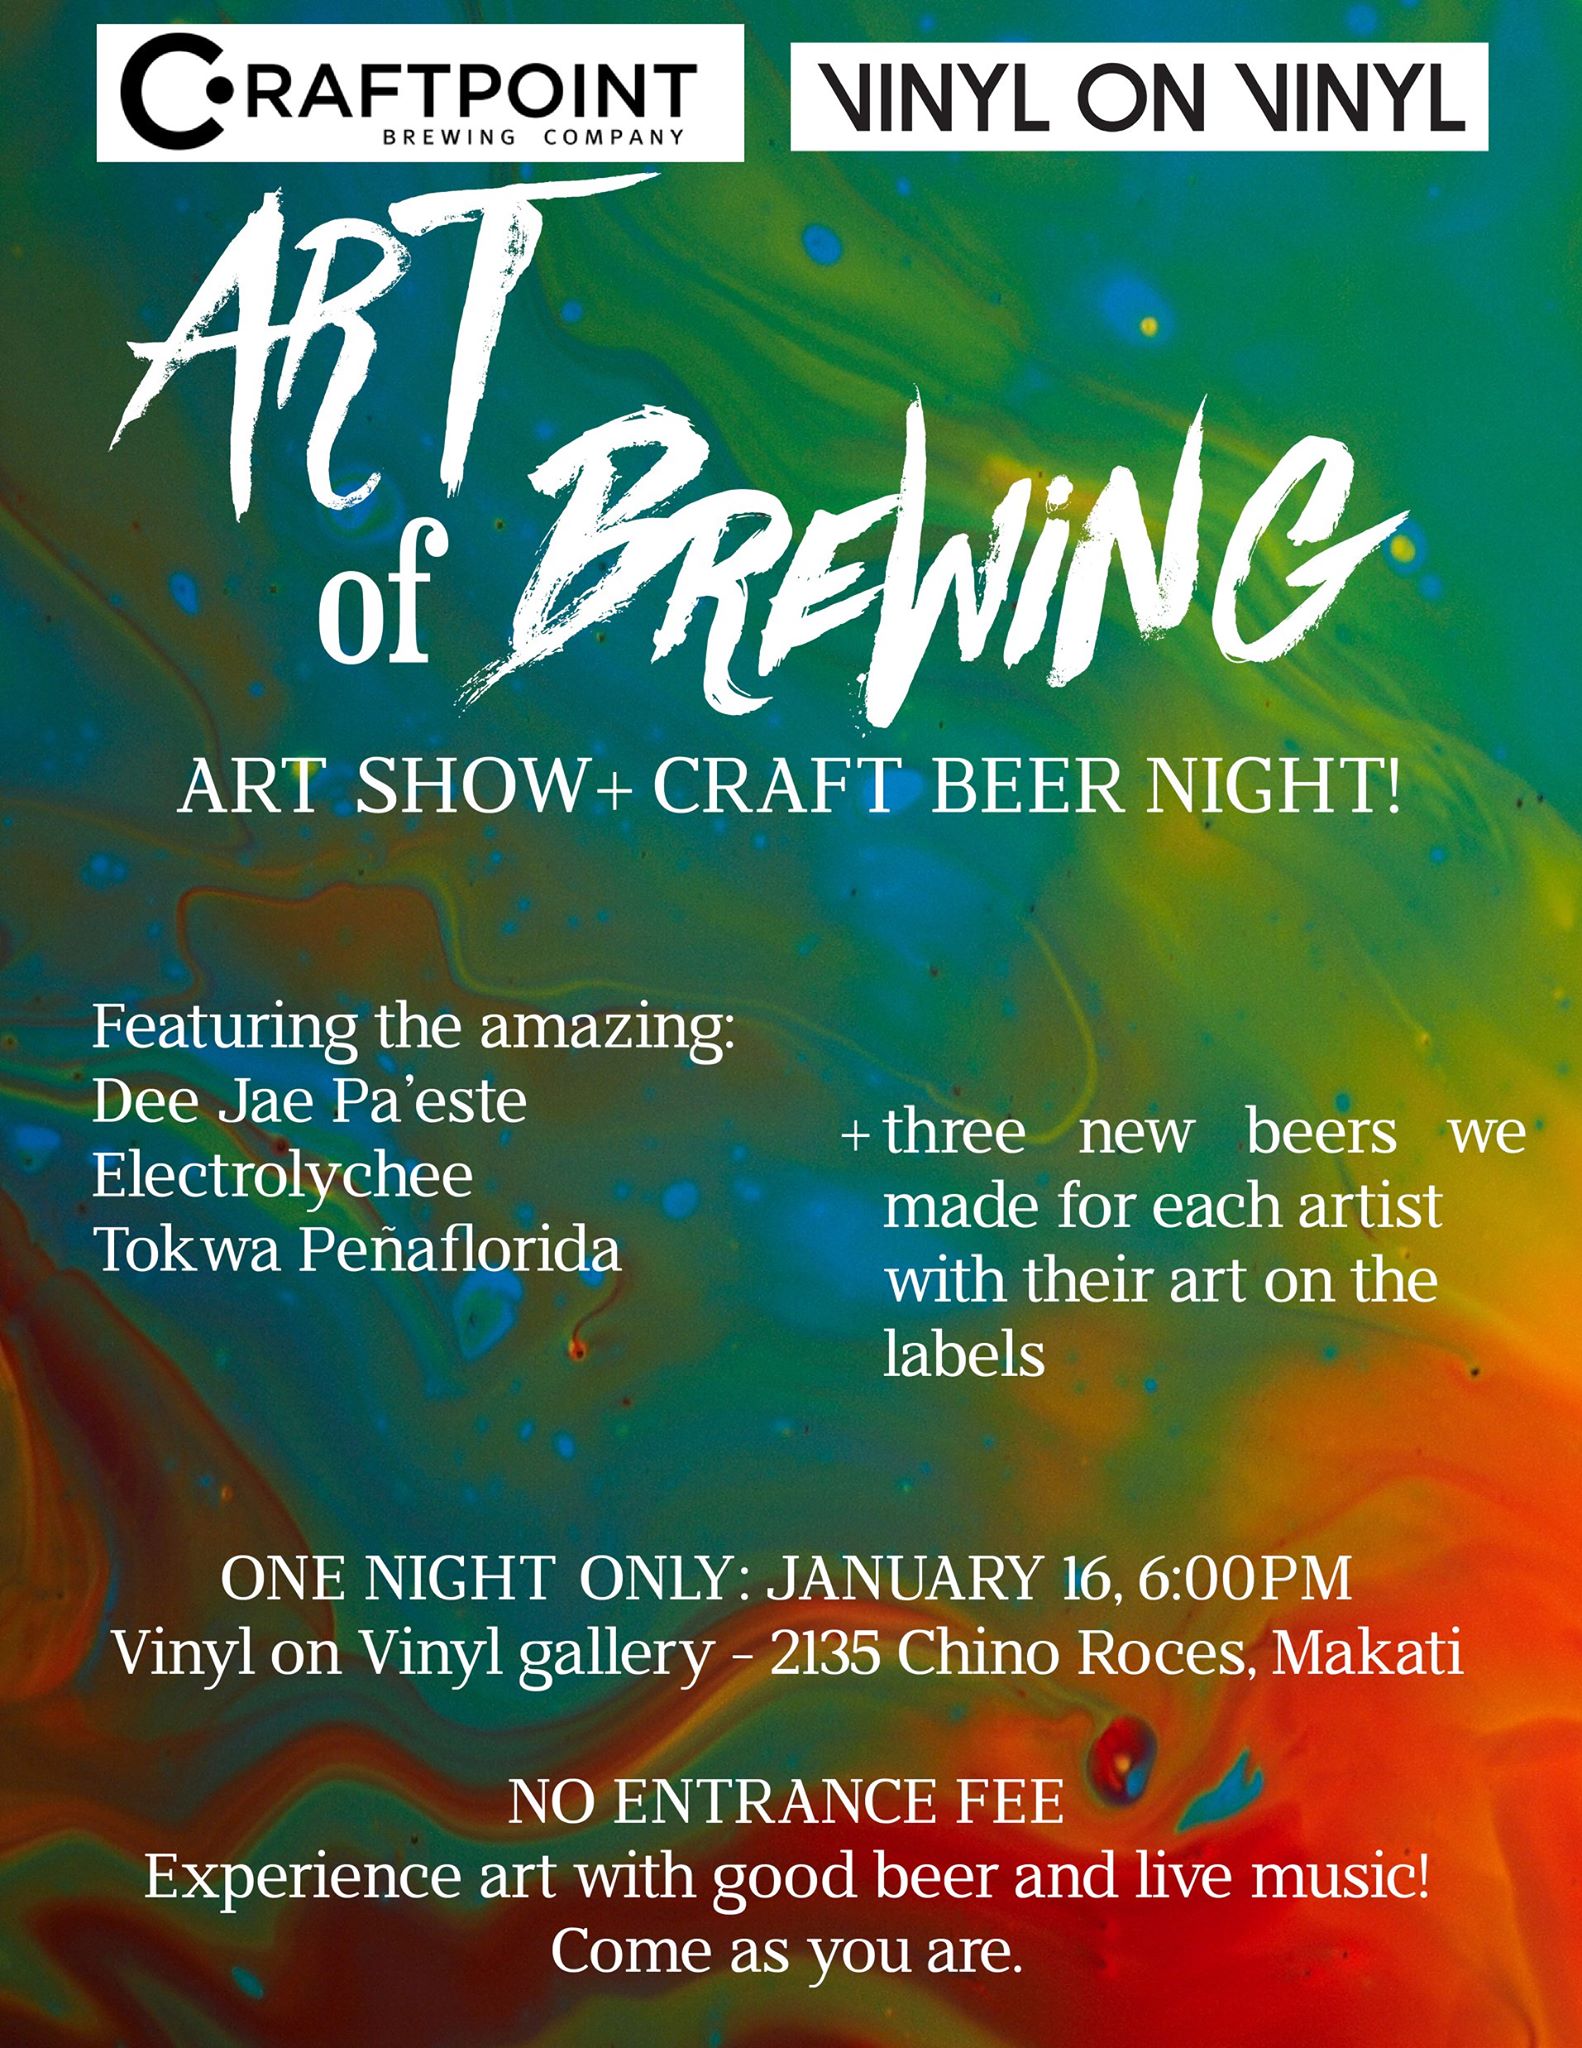 Art of Brewing: art show + triple beer launch! clock Saturday, January 16 at 6 PM Next Week · 89°F / 71°F Clear pin Show Map Vinyl on Vinyl 2135 Chino Roces Avenue, 1200 Makati, Philippines Uyyy, art show! AND BEER FEST! The ultimate creative-expression collaboration with three artists. We made three new beers with them, and they're making all the label art and then some. See what goes down when craft beer meets the art world! ONE NIGHT ONLY! No entrance fee. Just come right in to experience beer and art like you never have before. Artworks are pre-selling soon. Contact Vinyl on Vinyl for more information. Featuring works of the amazing: Electrolychee for Buhawi (toasted coconut brown ale) Tokwa Peñaflorida for Mayari (lavender chamomile garden ale) Dee Jae Pa'este for Makiling Magma (mango chili pale ale) There will be food! Live music by No Way José & Tollo!